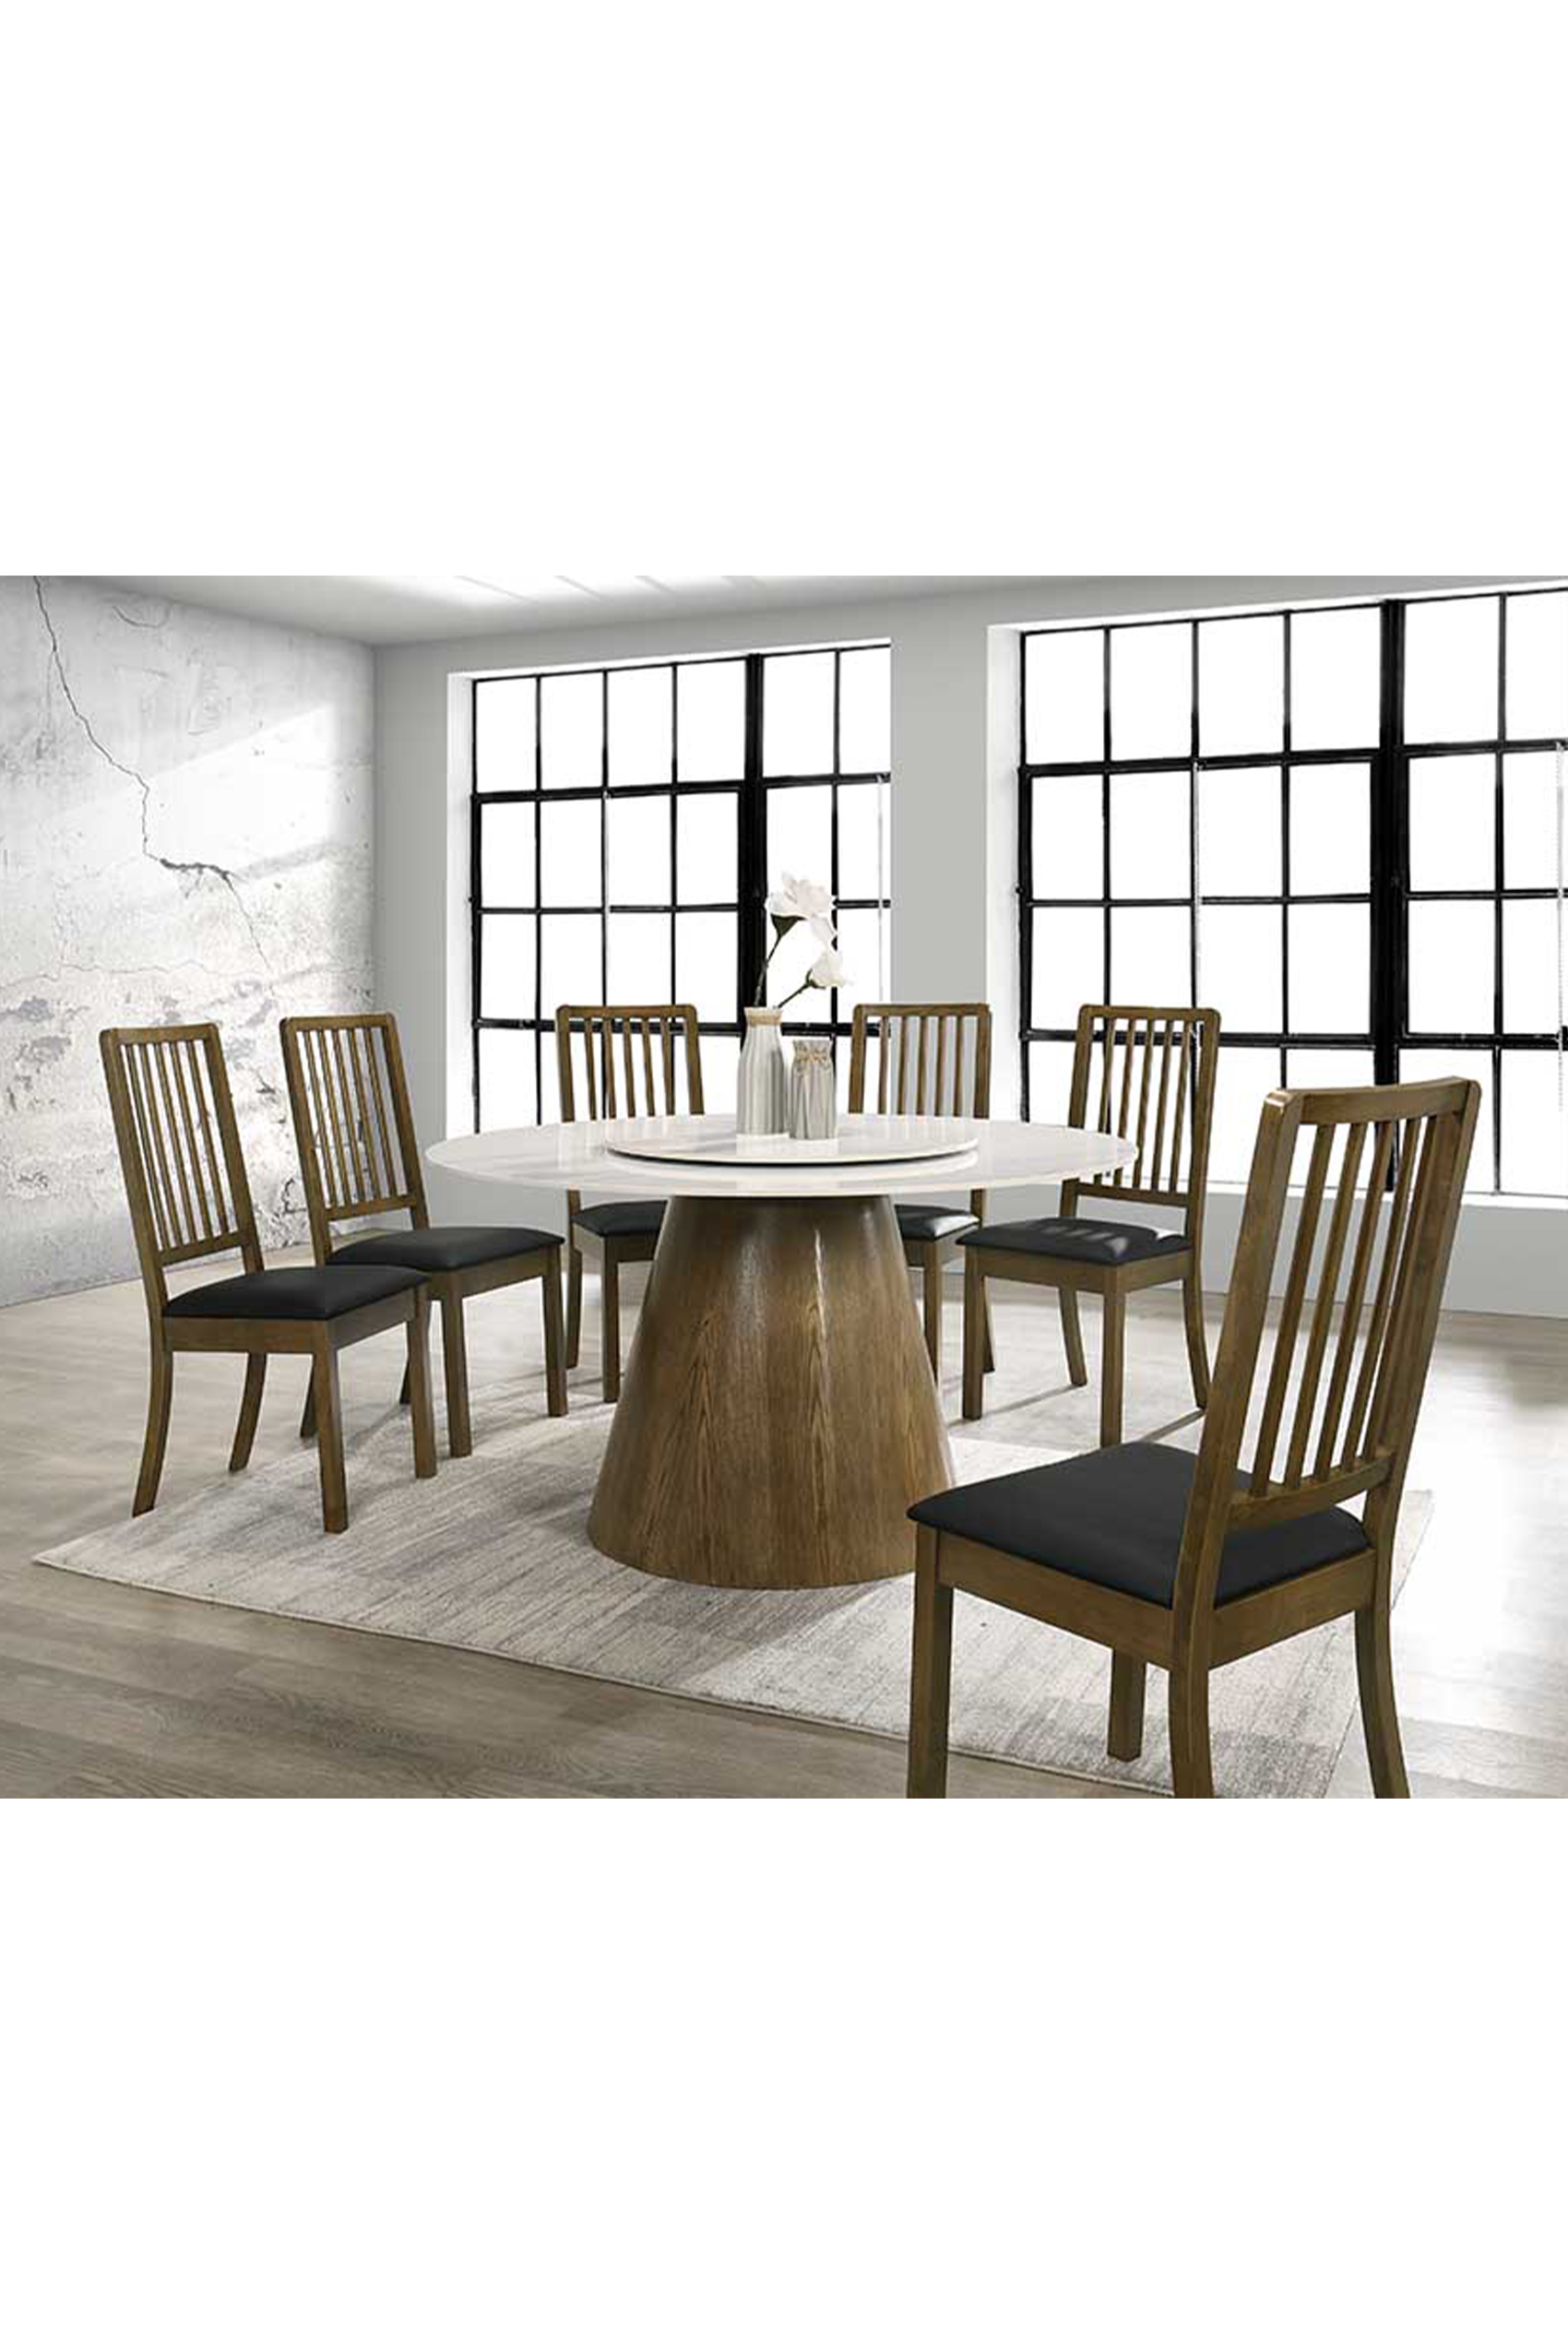 Livenza Round Dining Table + 6 Marittima Leather Dining Chairs